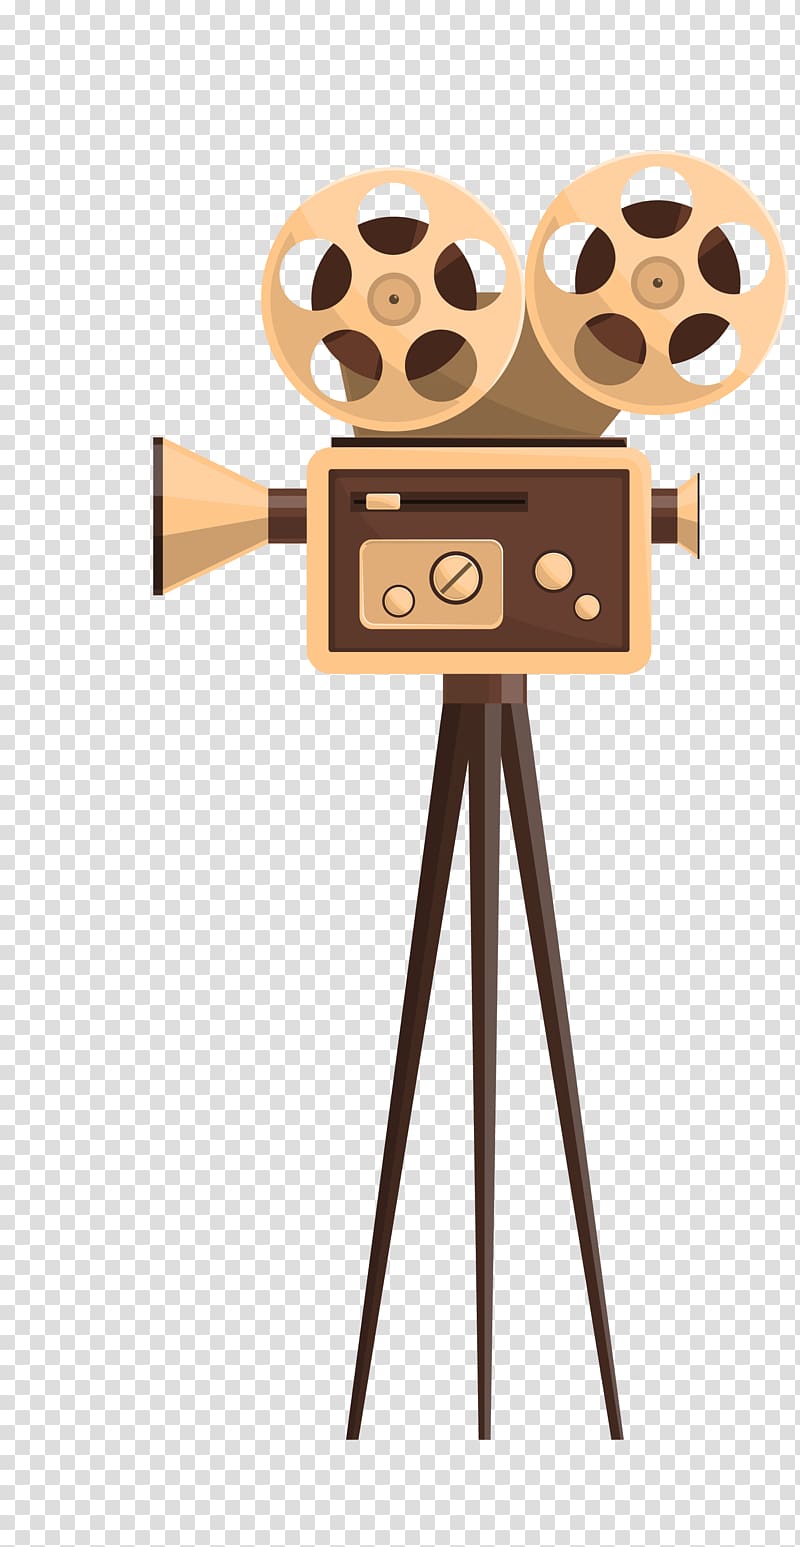 brown and black reel-to-reel projector with tripod stand illustration, Movie projector Video projector Euclidean , Yellow Retro Old Shanghai Movie Projector transparent background PNG clipart